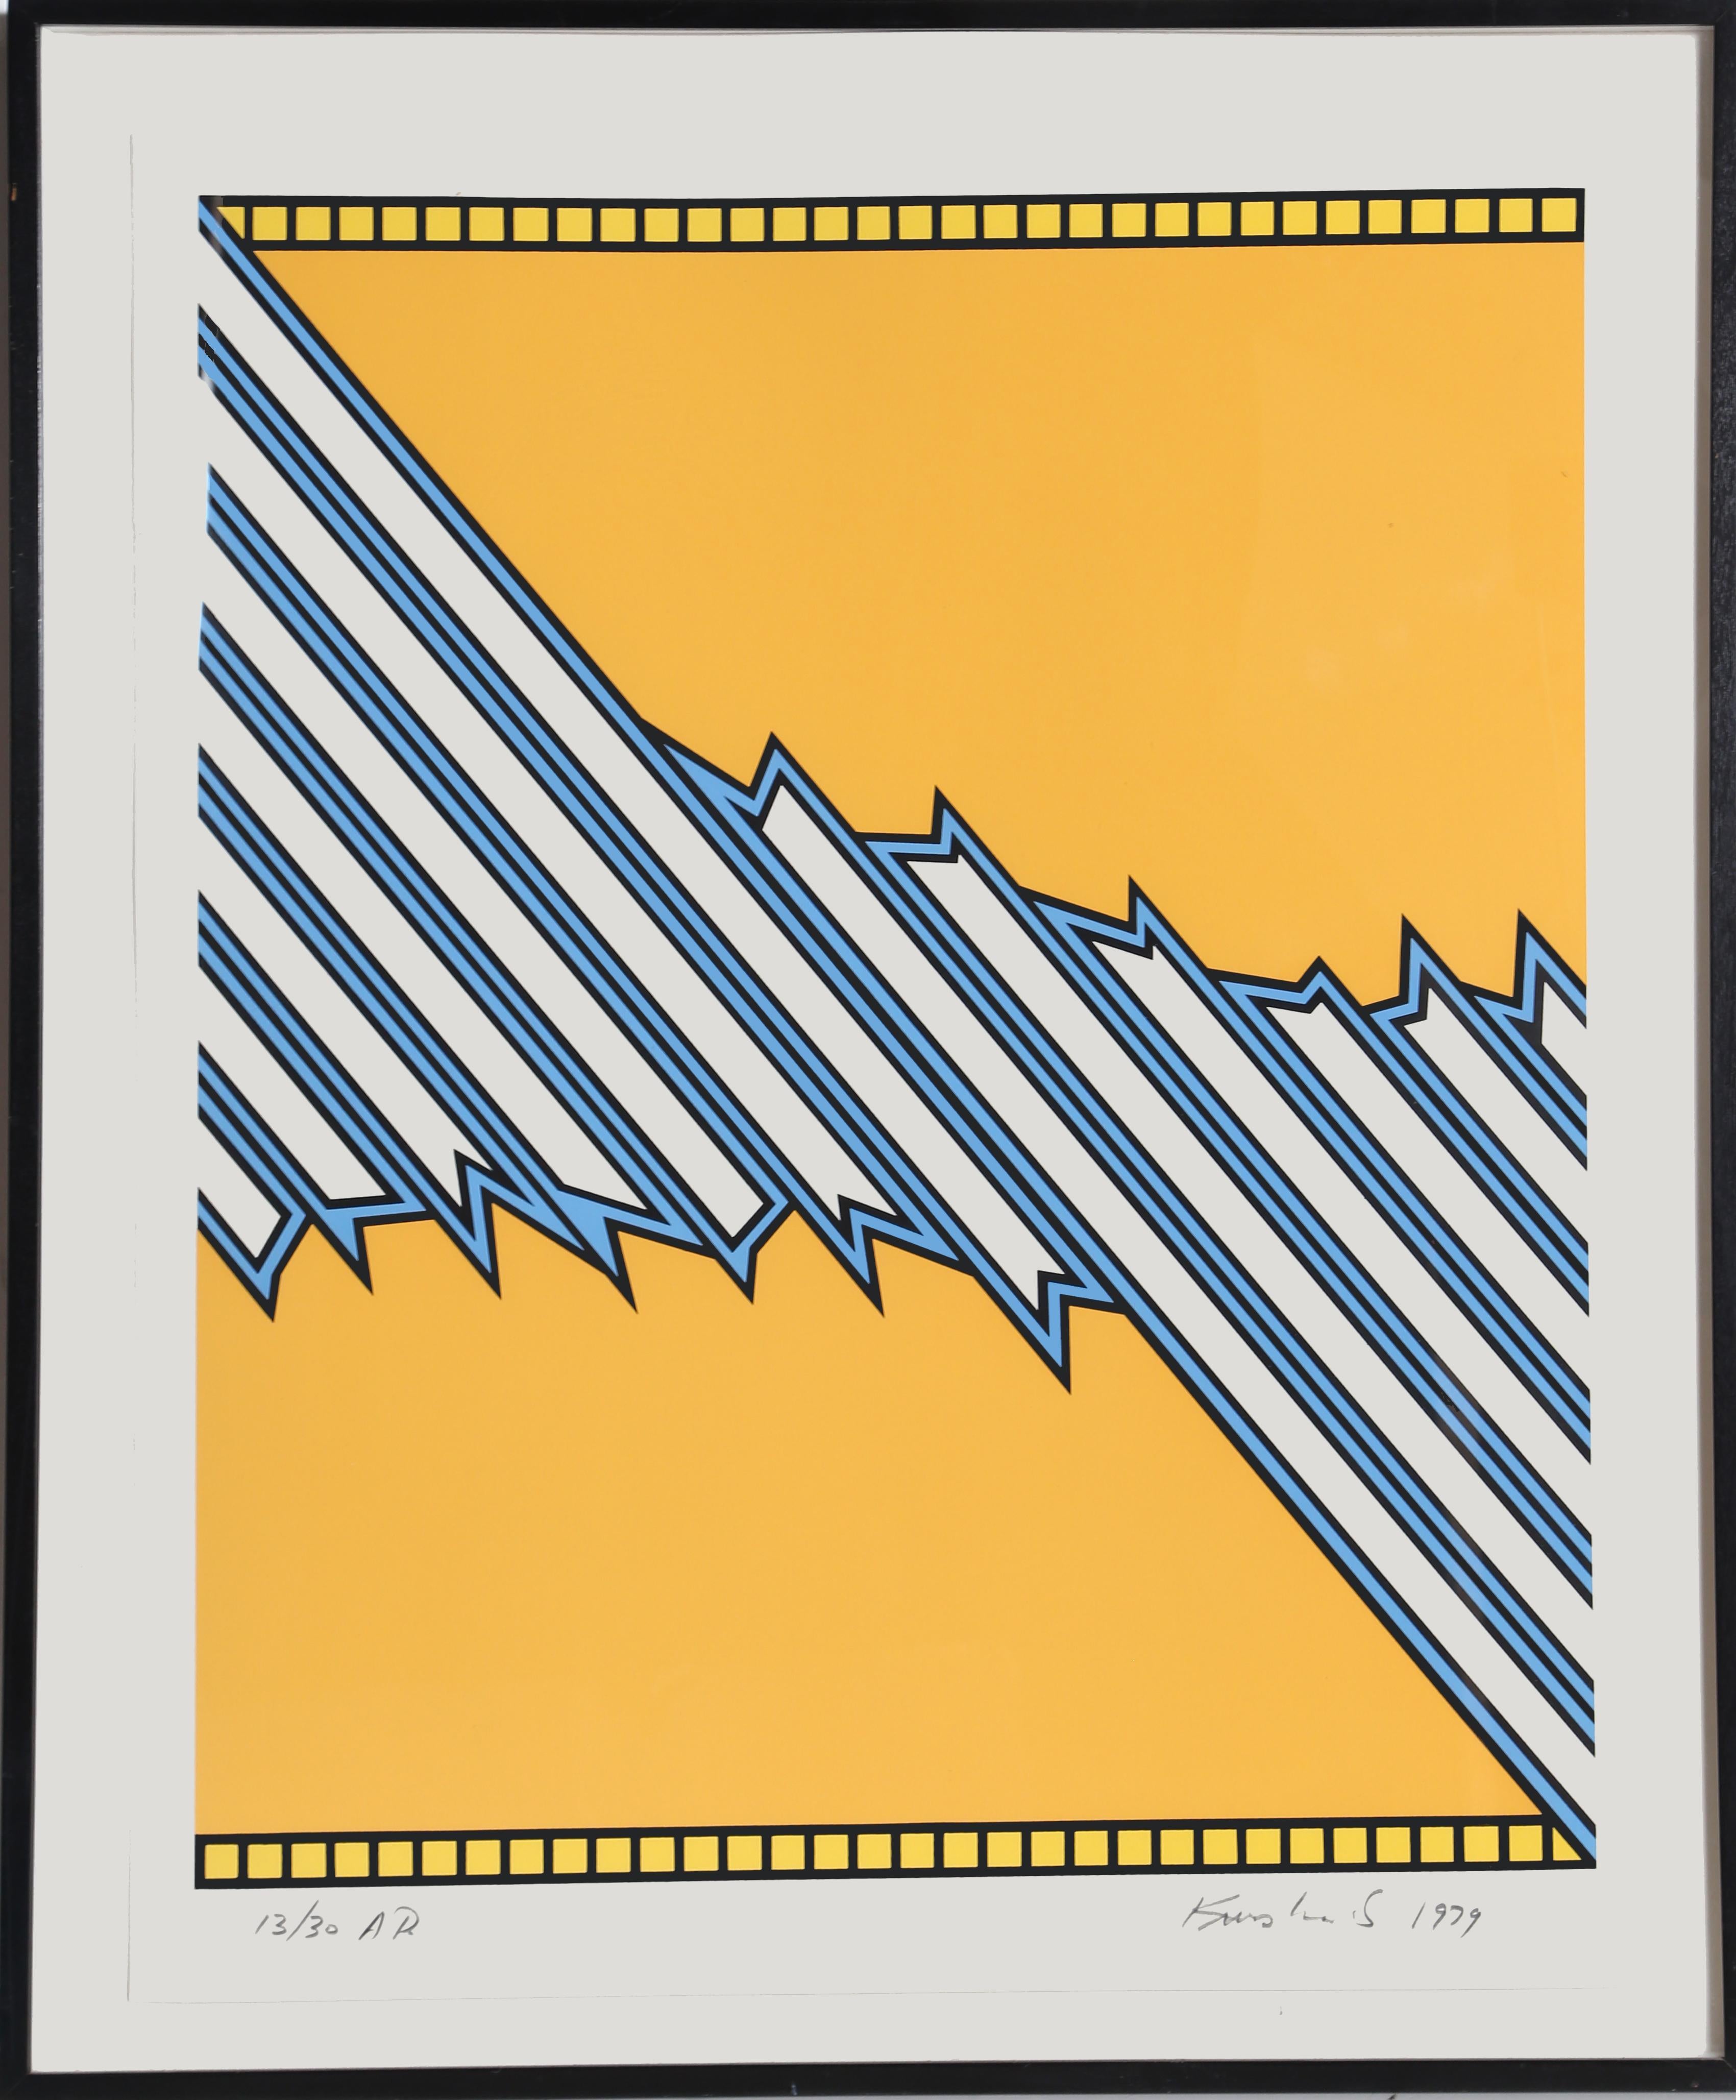 Artist:	Nicholas Krushenick
Title:	Greensboro
Year:	1979
Medium:	Silkscreen, signed and numbered in pencil 
Edition:	200, AP 30
Paper Size:	34 x 26 inches
Frame: 36 x 30 inches